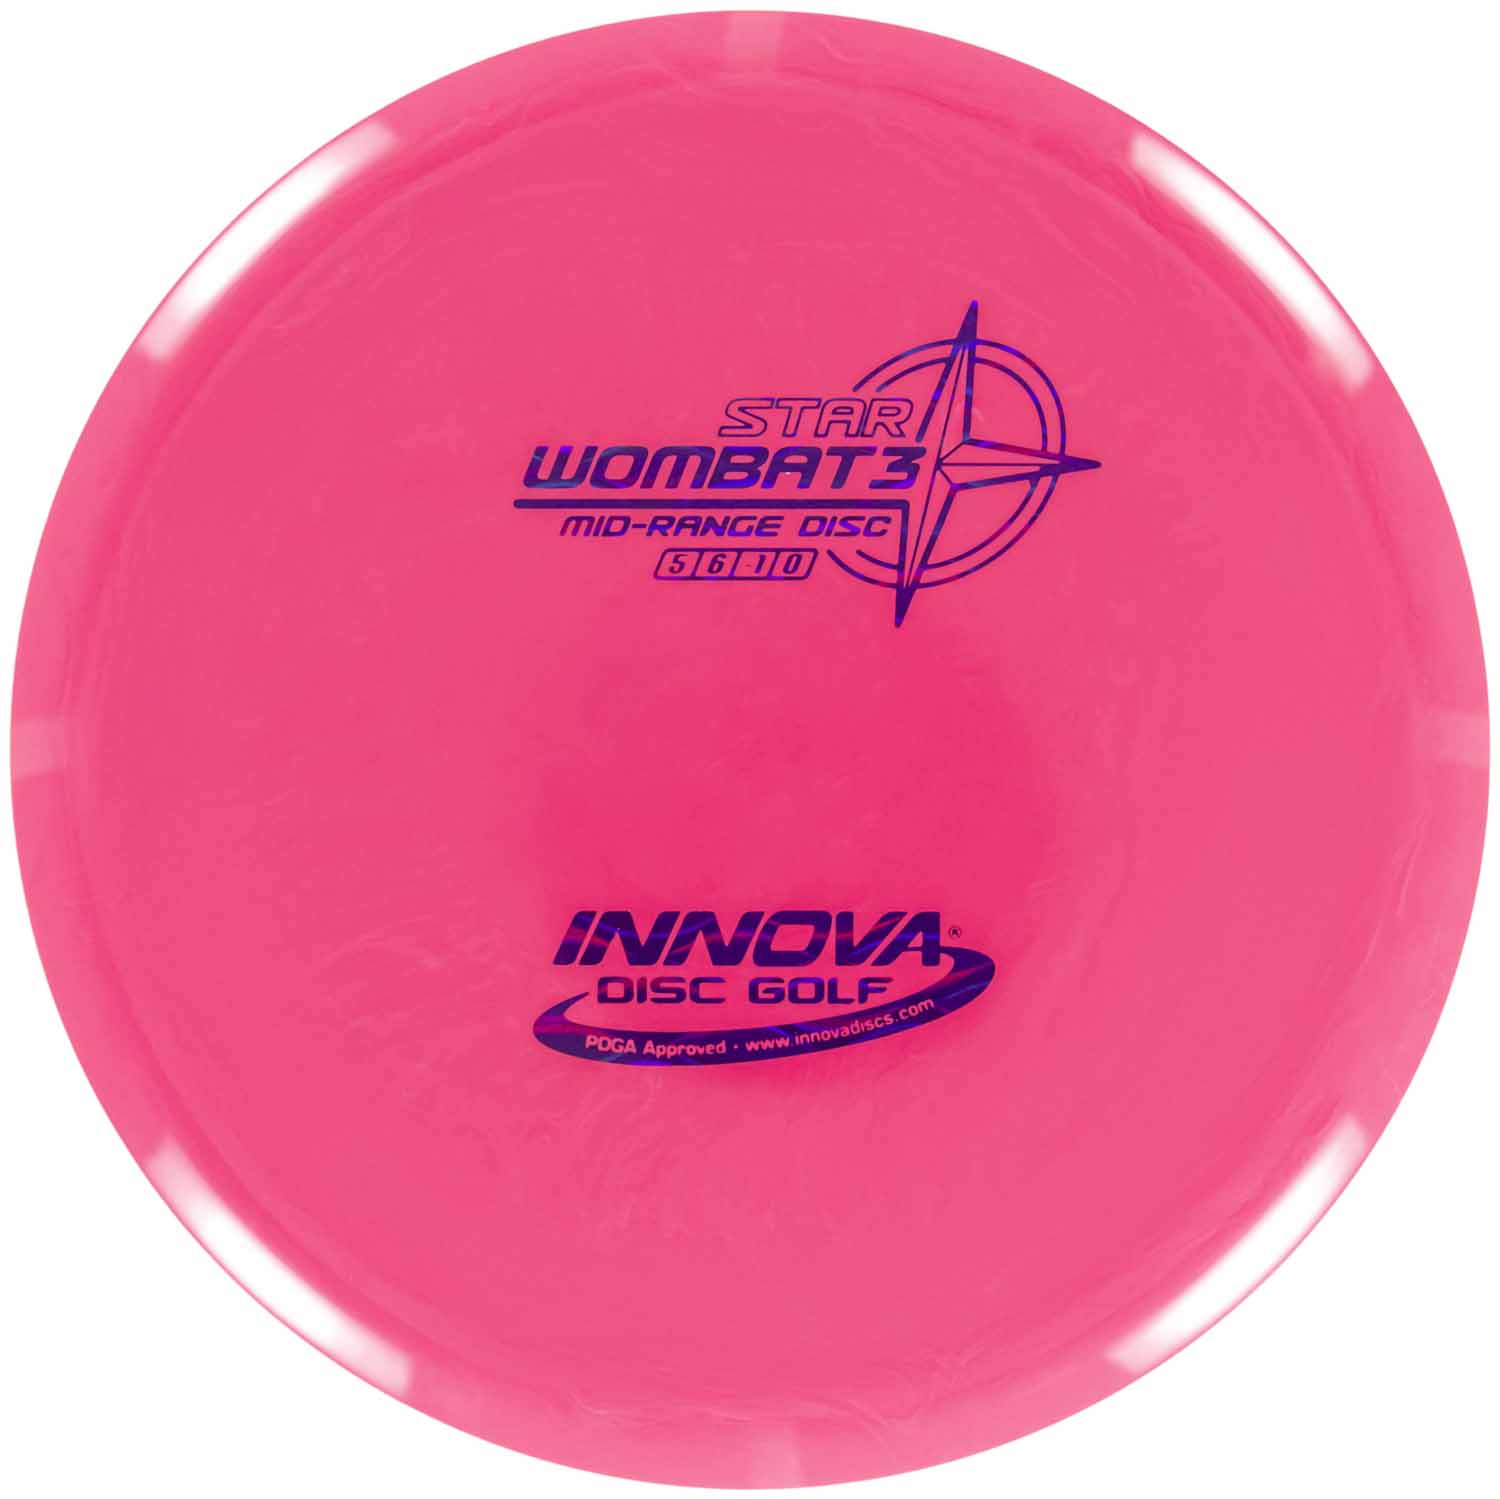 Star Wombat3 from Disc Golf United